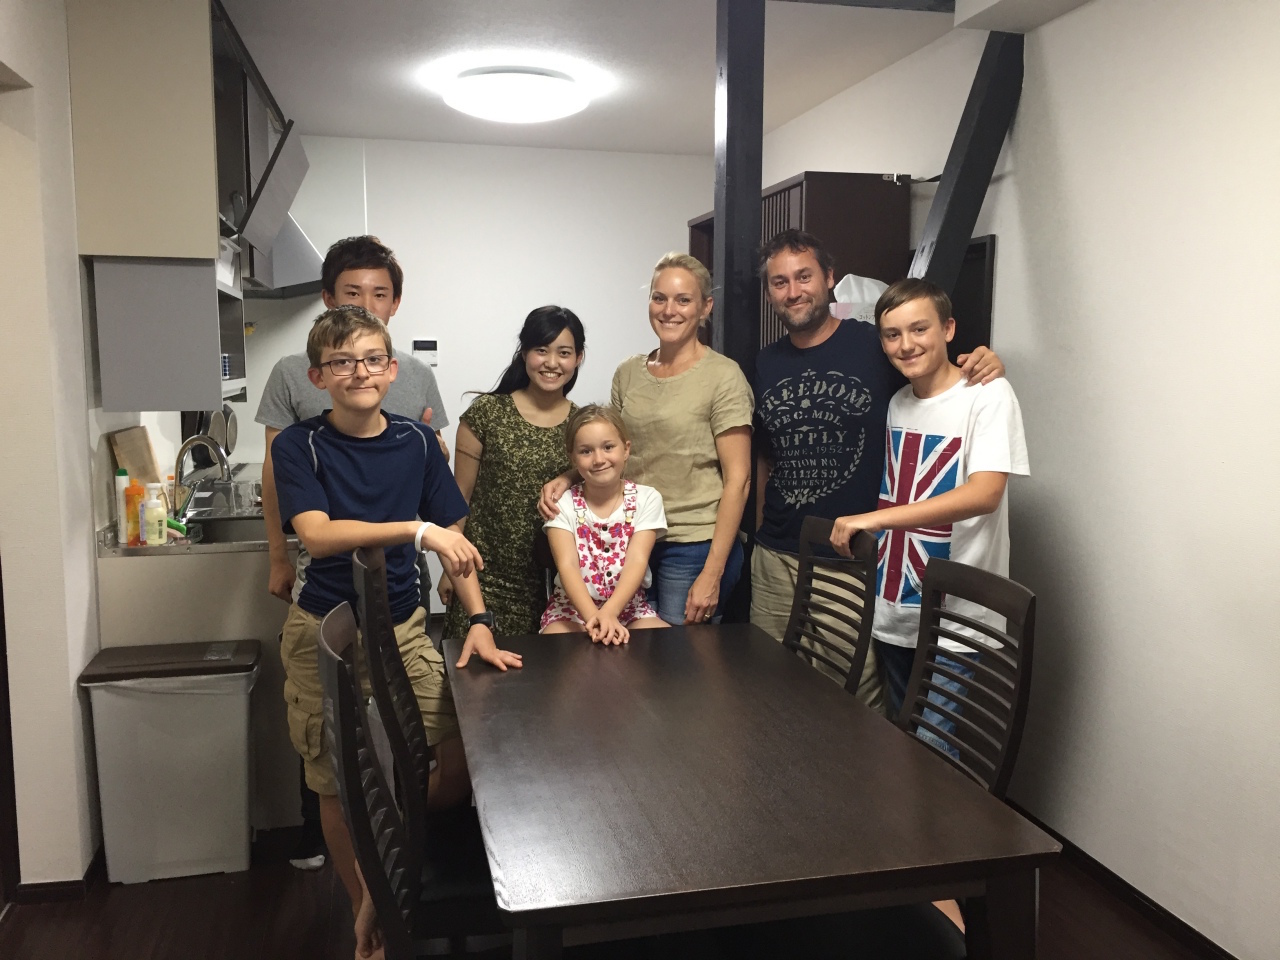 An Australian family stayed Yoshi’s house for four days